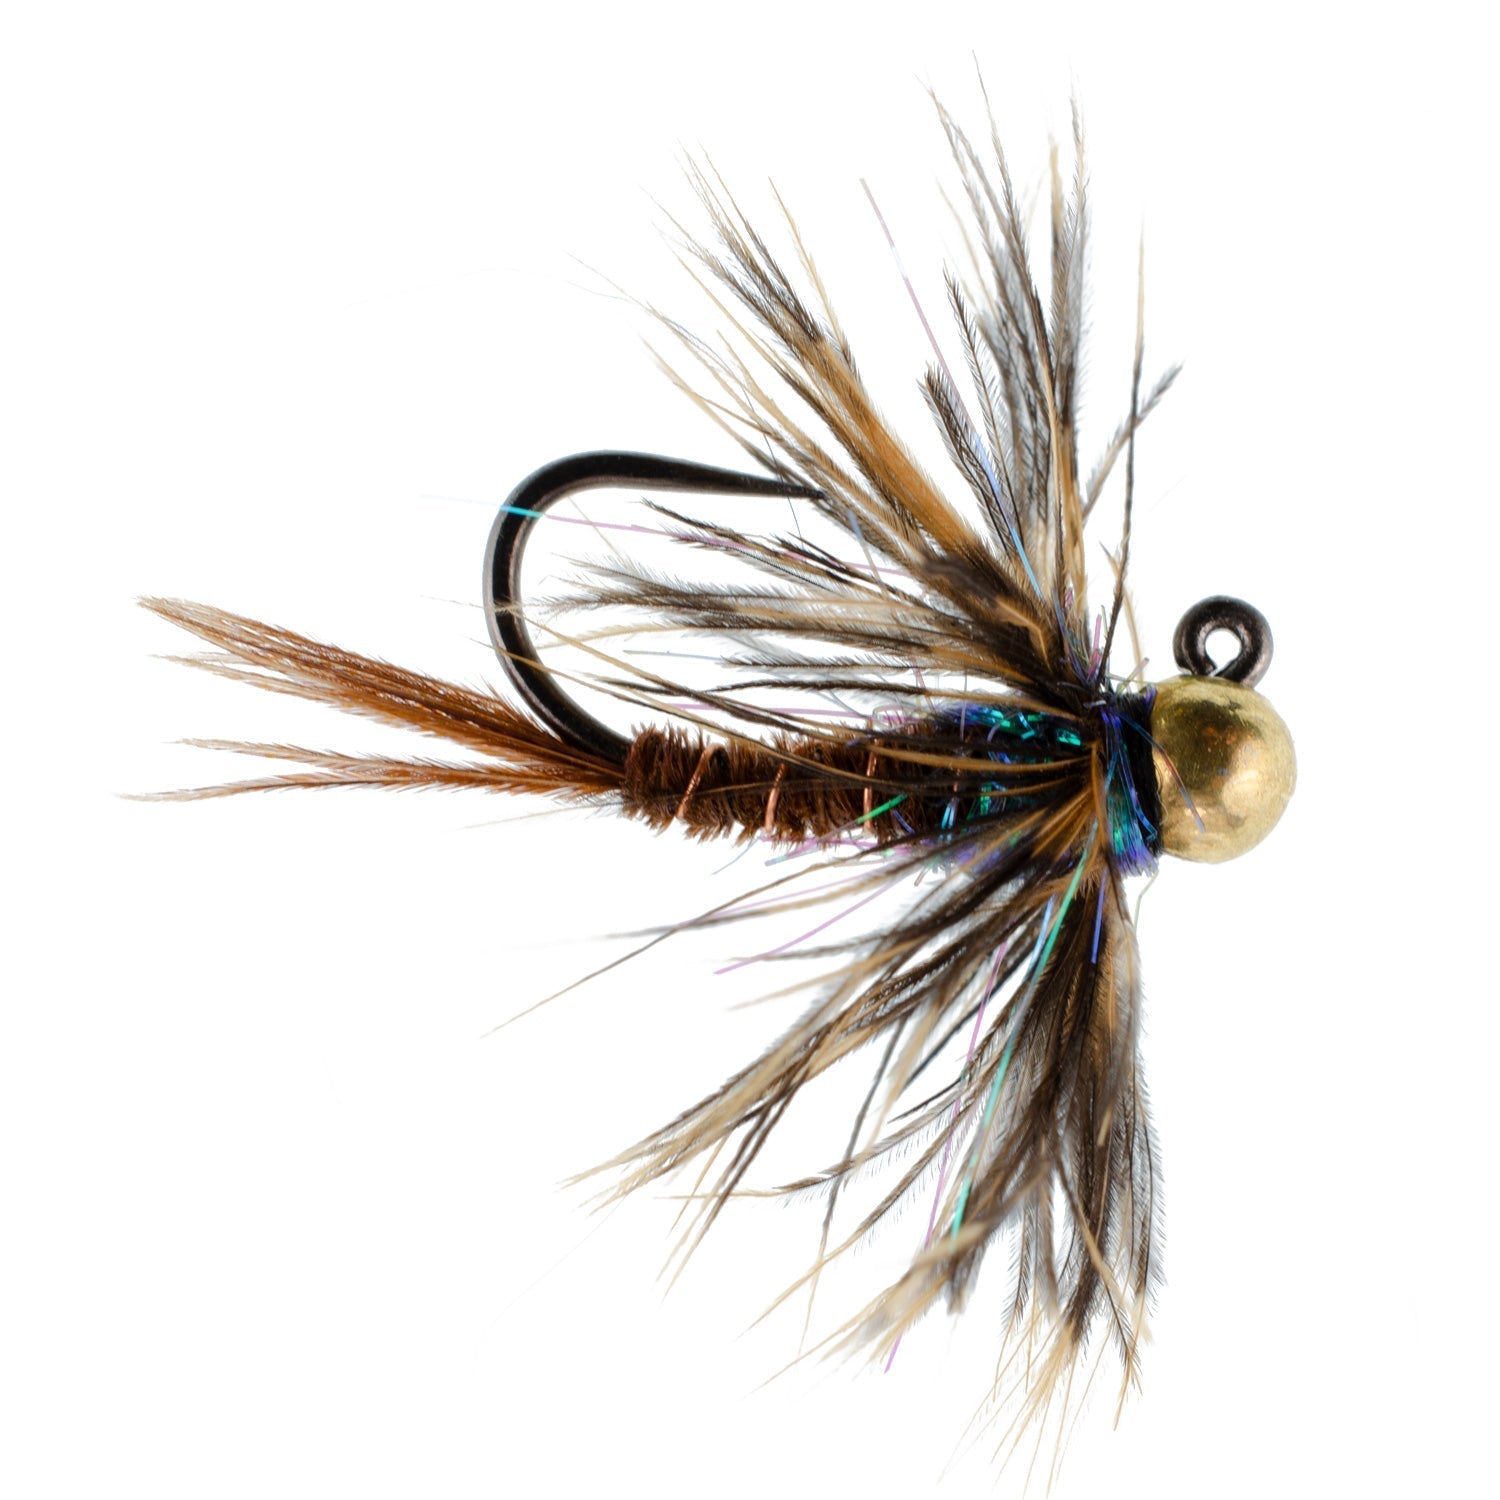 Tungsten Bead Soft Hackle Pheasant Tail Tactical Jig Czech Nymph Euro Nymphing Fly - 6 Flies Size 16